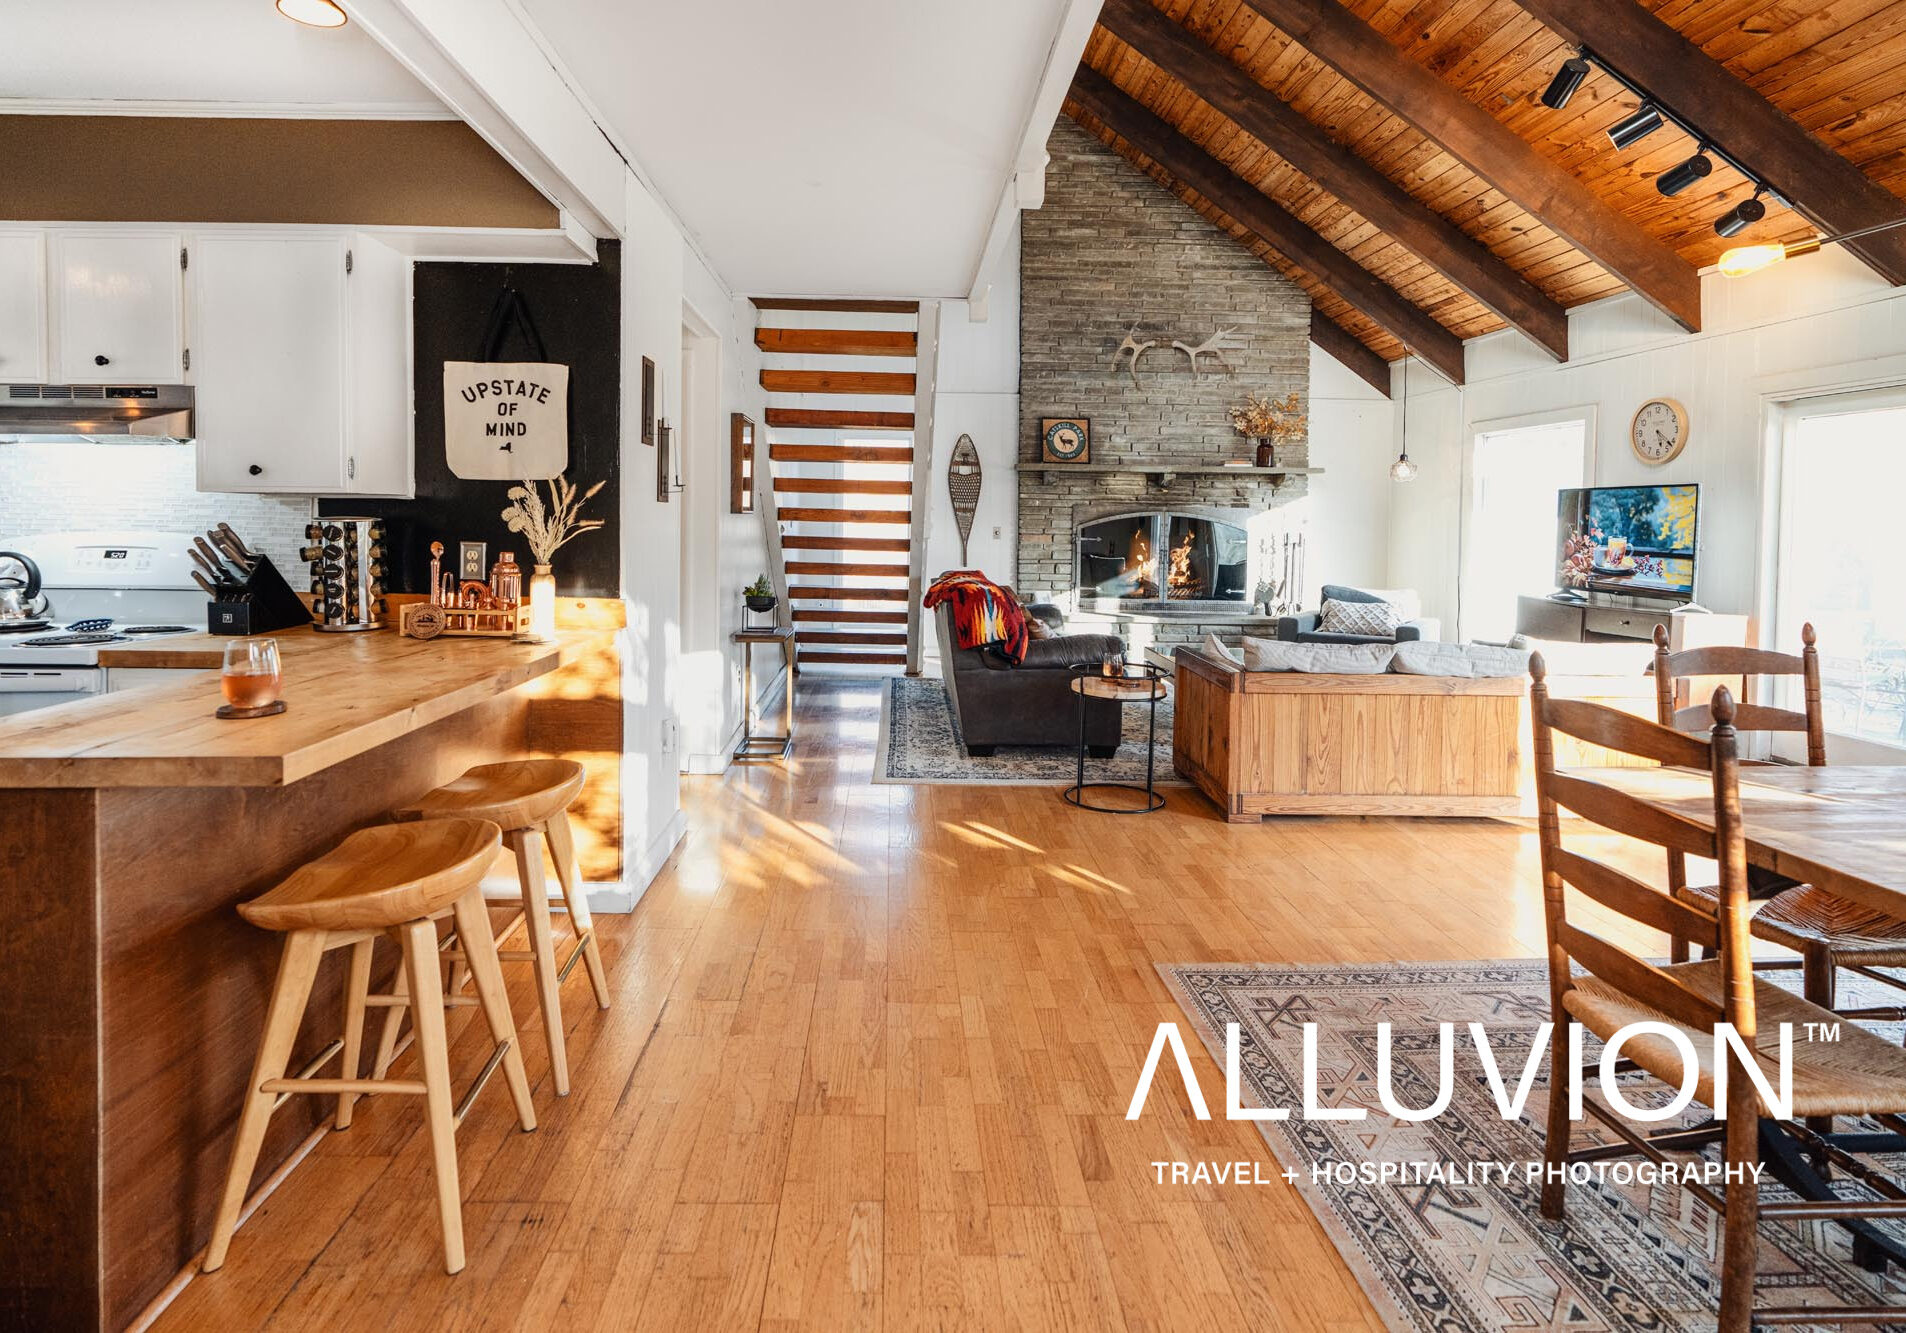 Experiential Hospitality Photography in the Hudson Valley and Catskills: Spotlight on Maxwell Alexander's Catskill Mountain Cabin Photoshoot – Alluvion Media